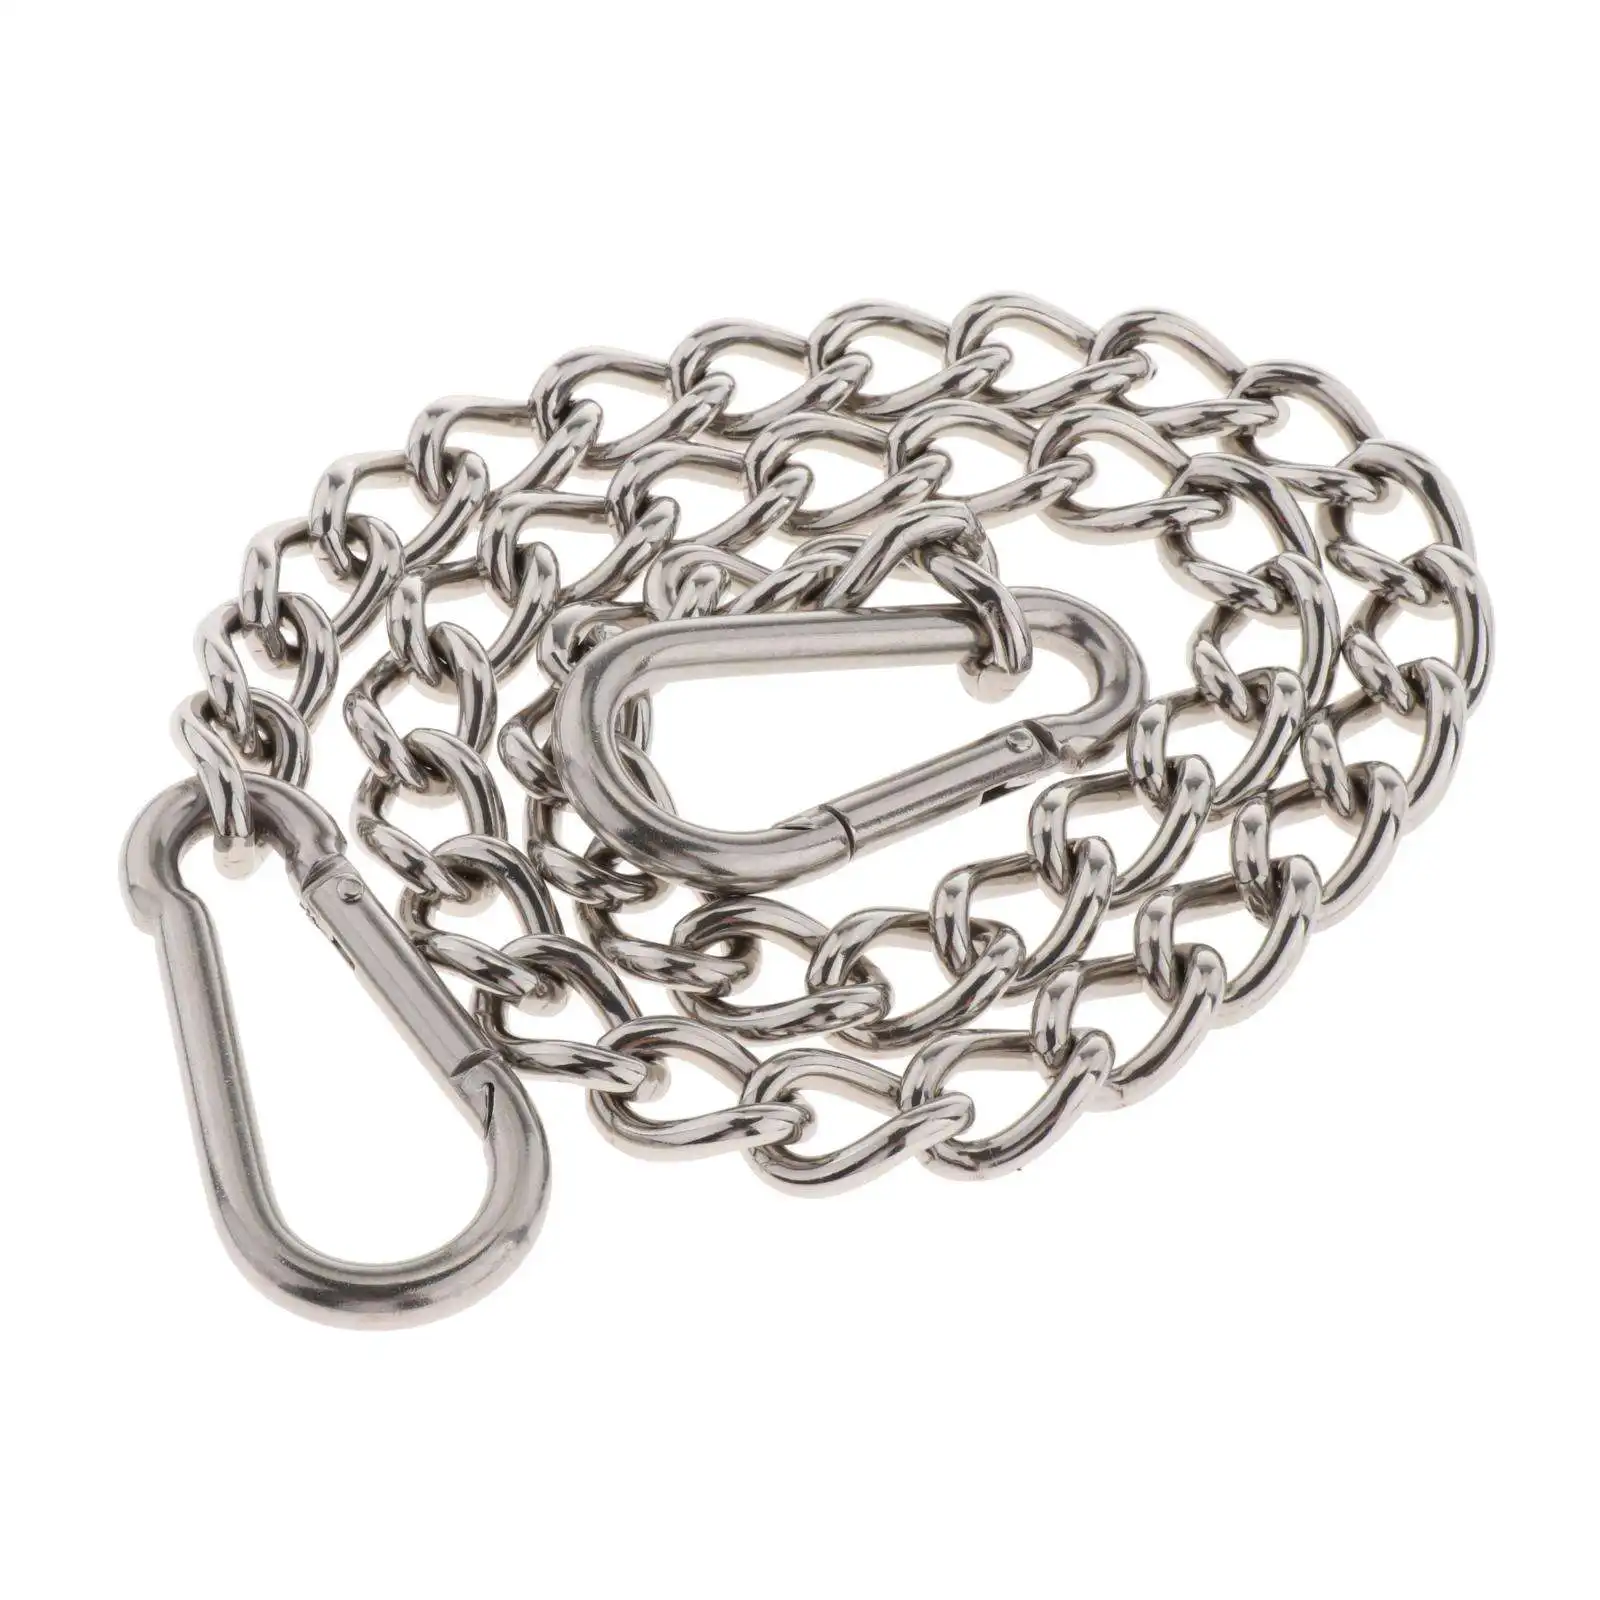 Hanging Chair Chain 200kg Capacity Heavy Duty Variable Attachment Hooks for Hanging Chair Hammock